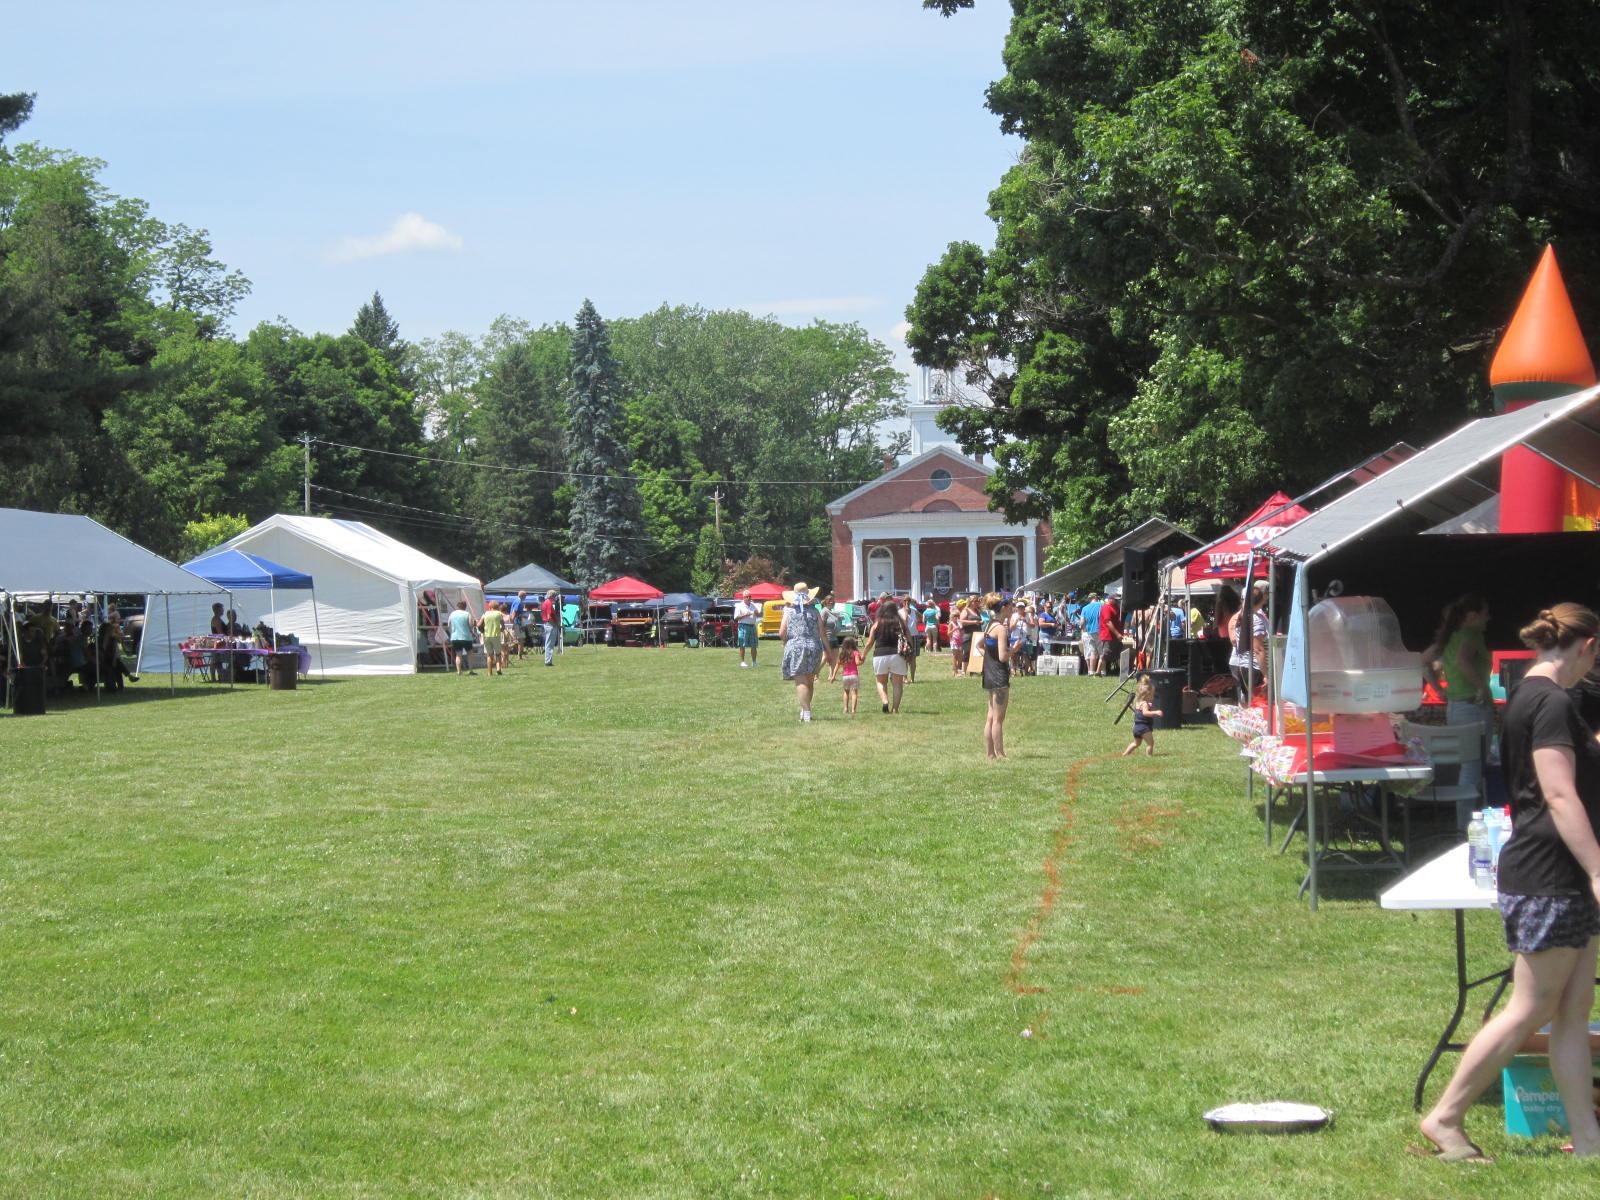 A village green with a festival happening